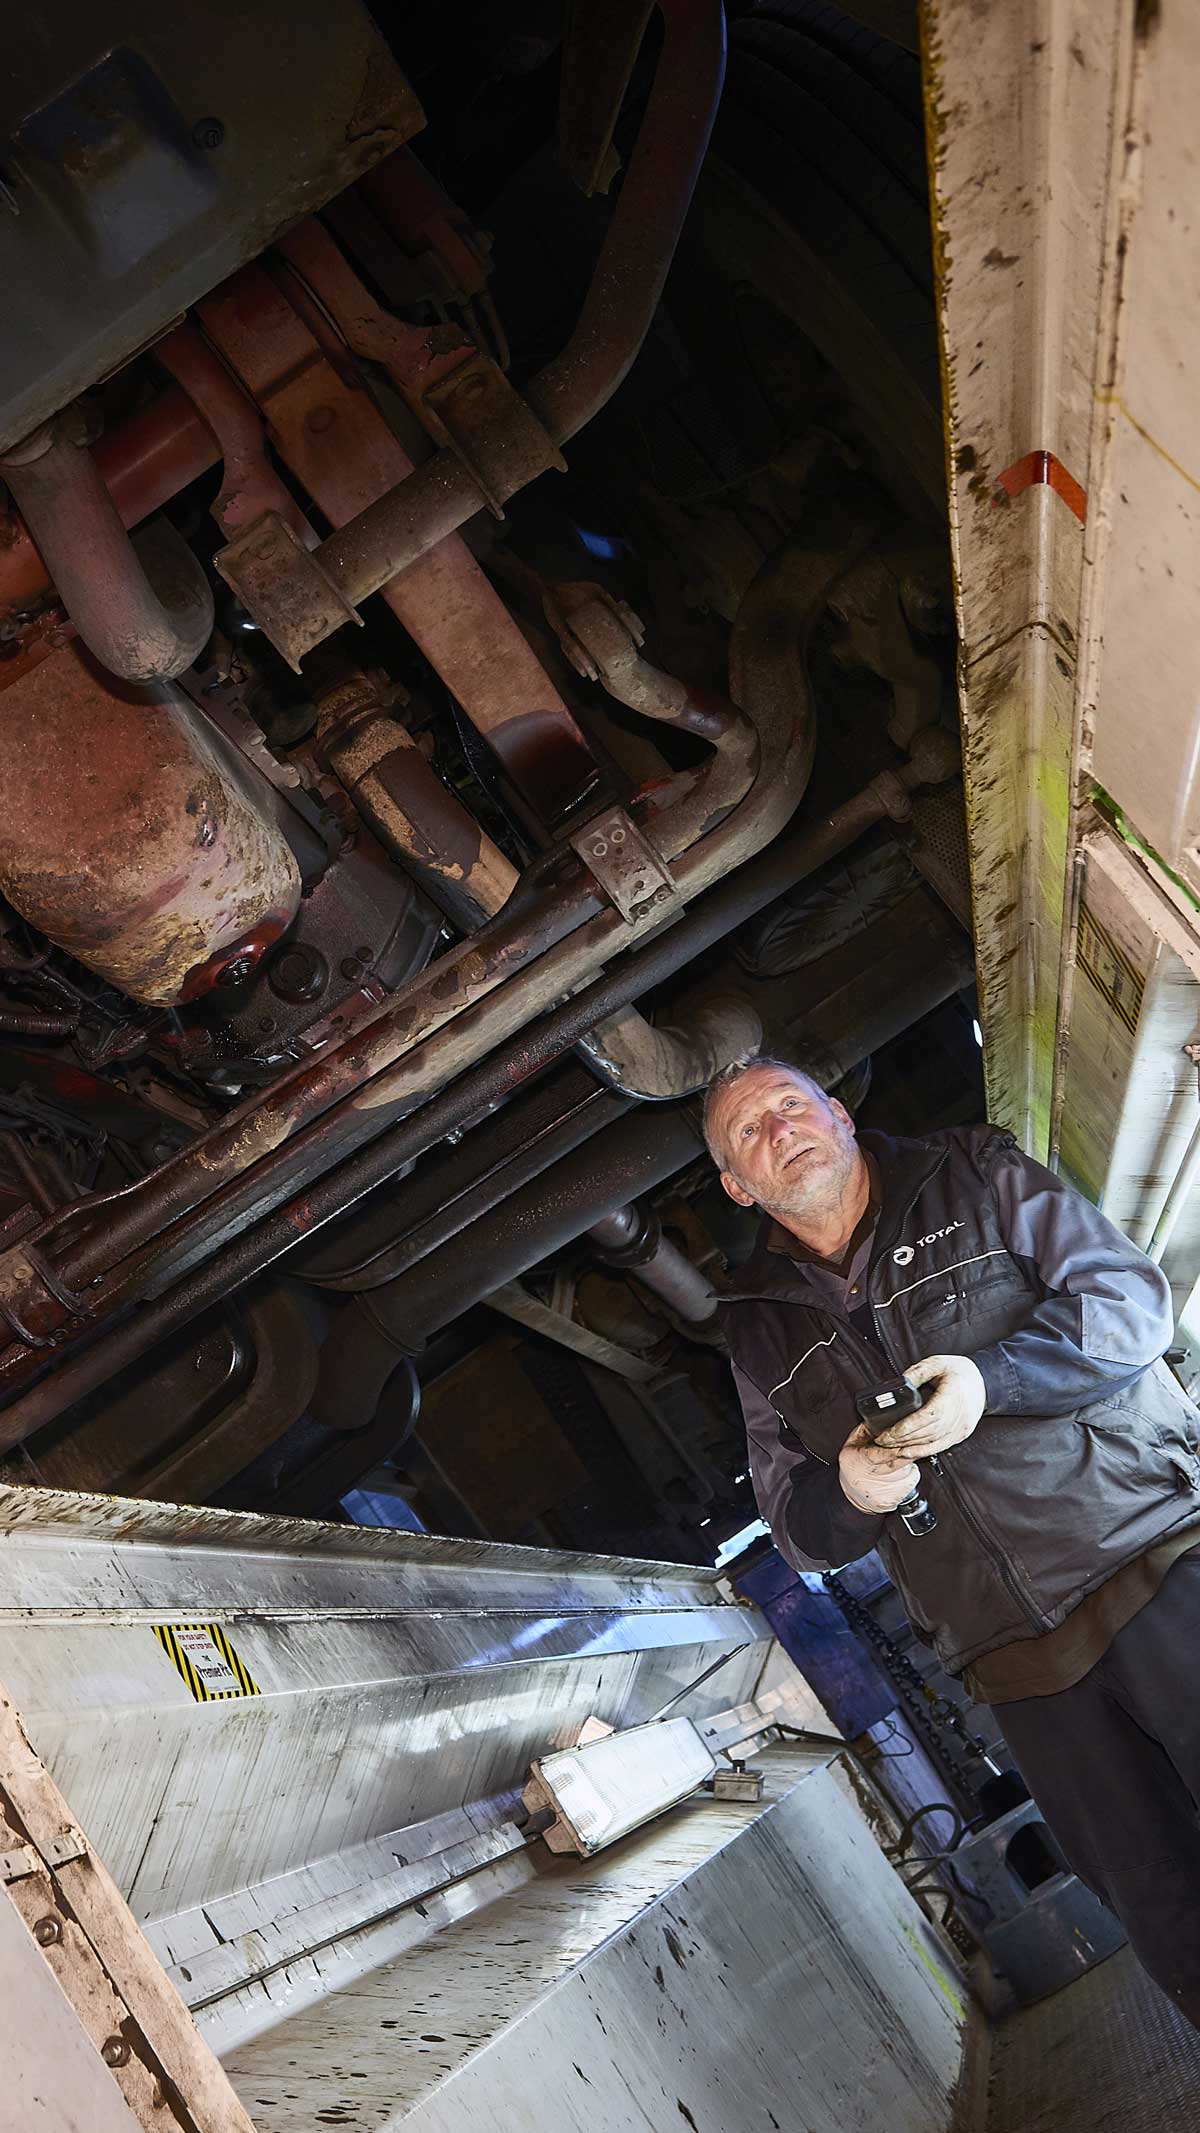 Are you Looking for Professional Truck Repairs in Dublin?